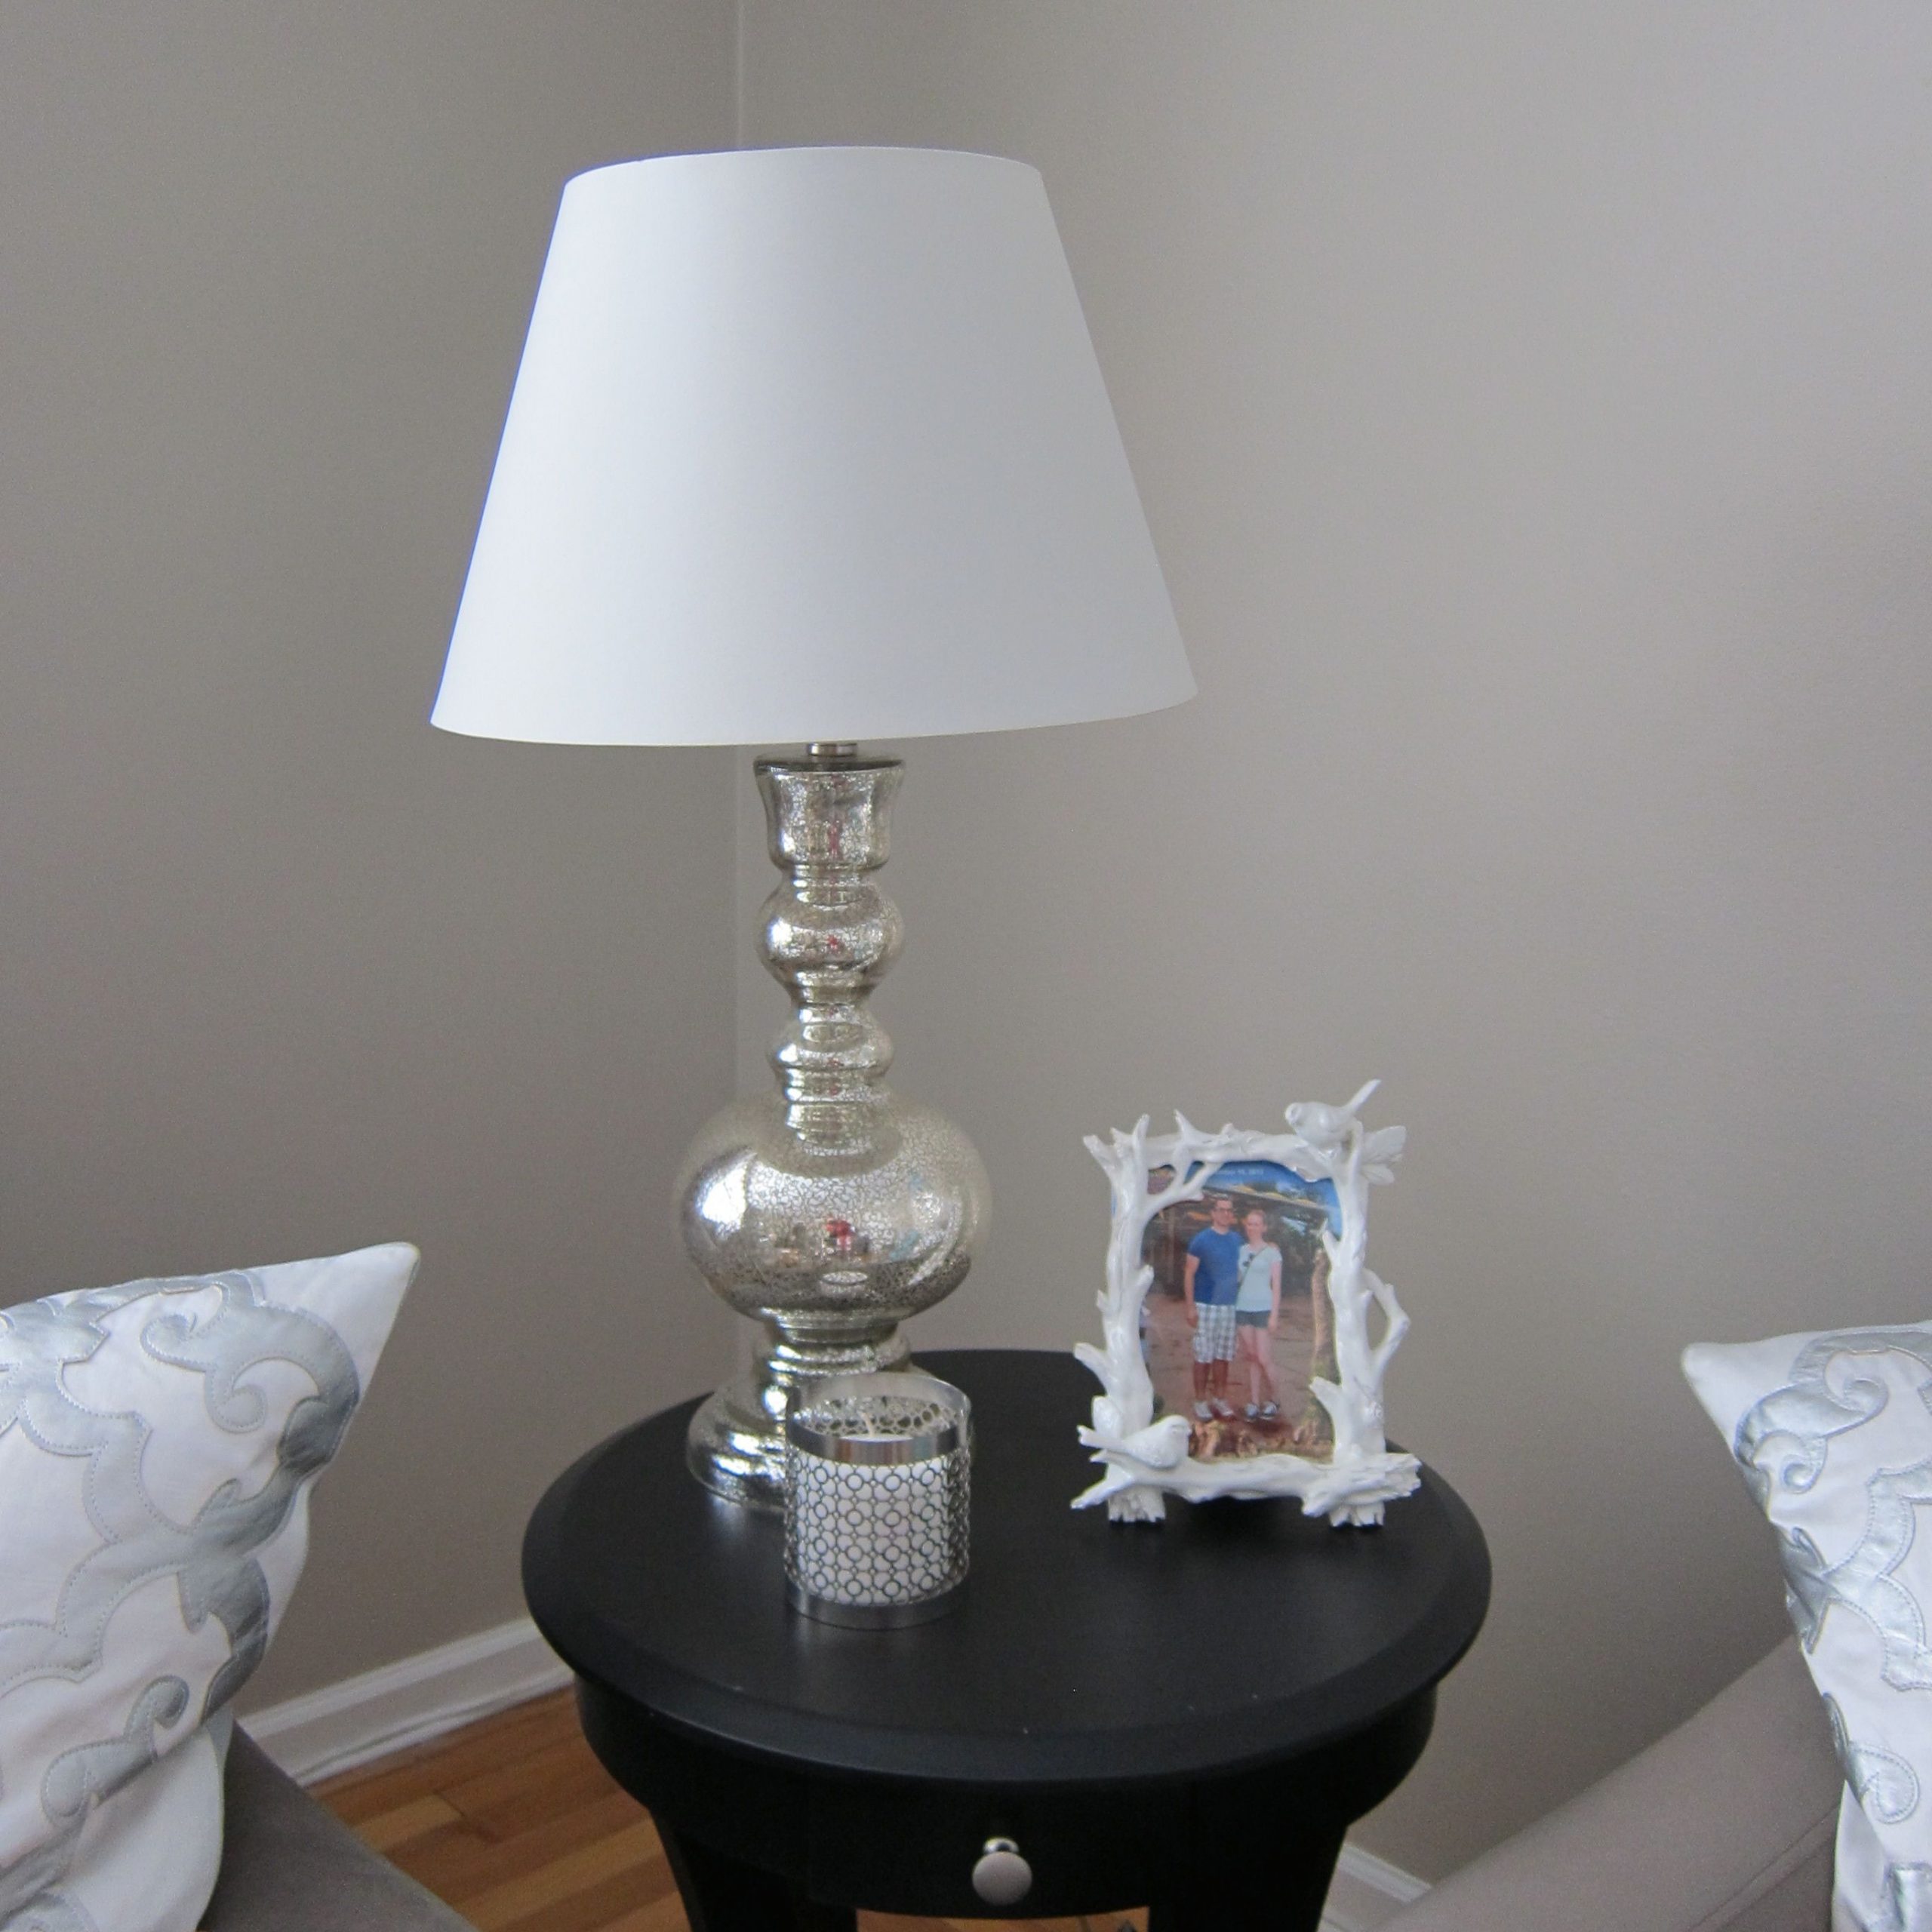 Small Table Lamp Bed Bath And Beyond • Display Cabinet